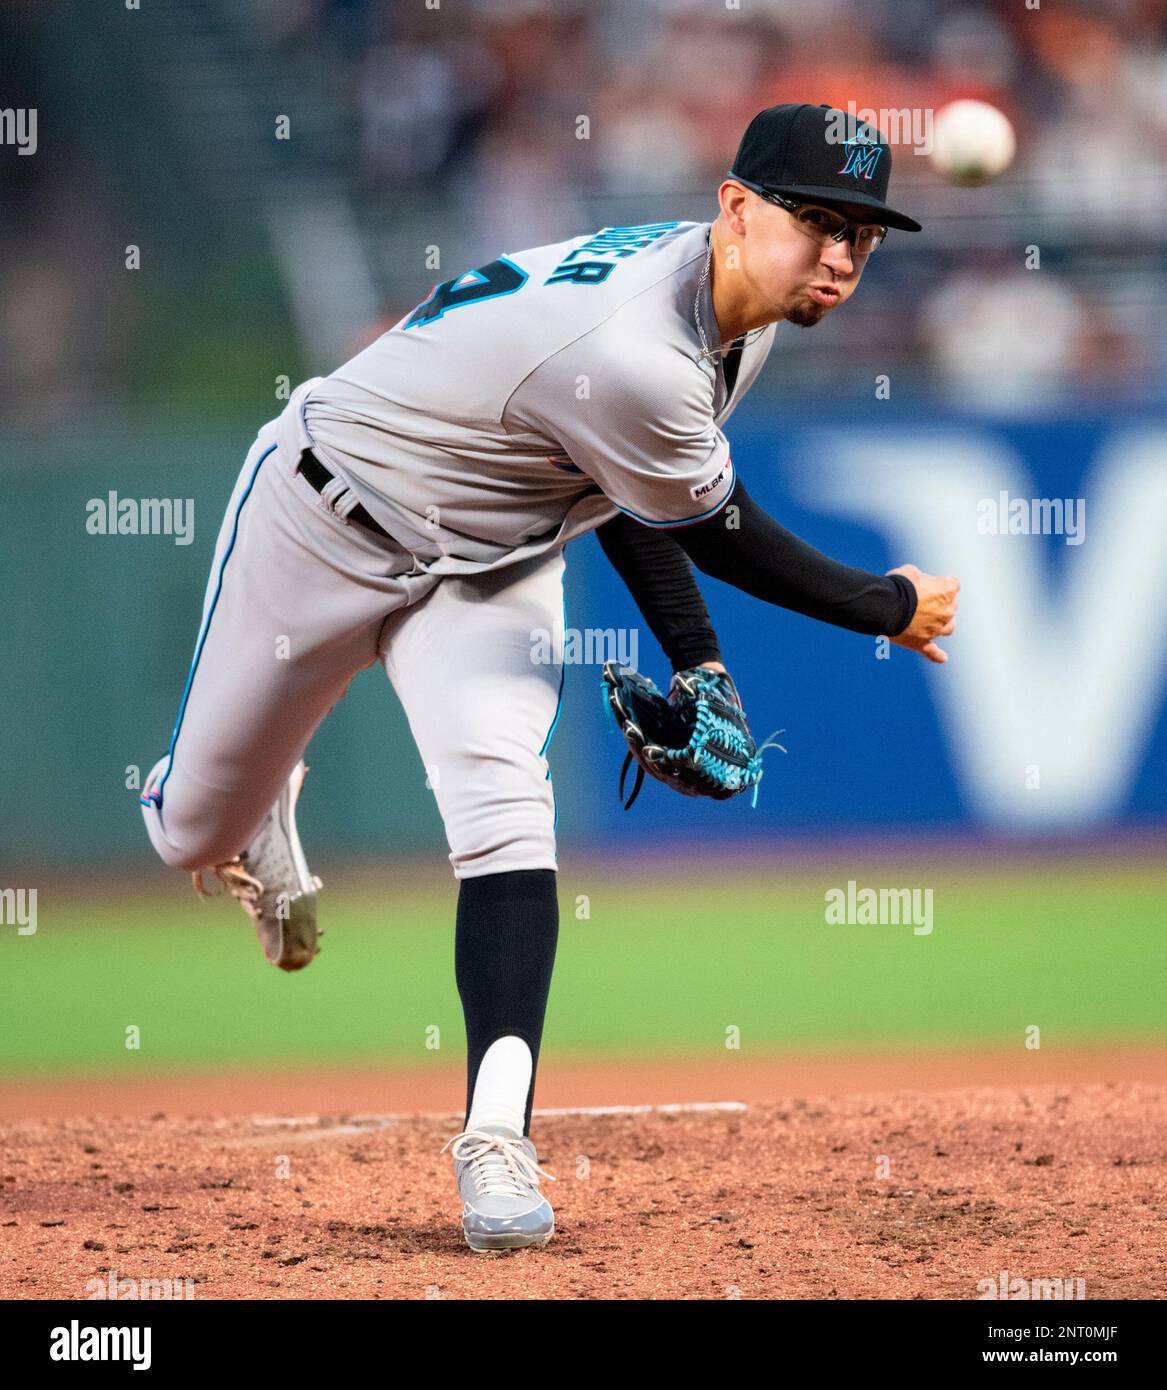 September 14, 2019: Miami Marlins starting pitcher Robert Dugger (64) throws during a MLB baseball game between the Miami Marlins and the San Francisco Giants at Oracle Park in San Francisco, California. Valerie Shoaps/CSM(Credit Image: © Valerie Shoaps/CSM via ZUMA Wire) (Cal Sport Media via AP Images) Stockfoto